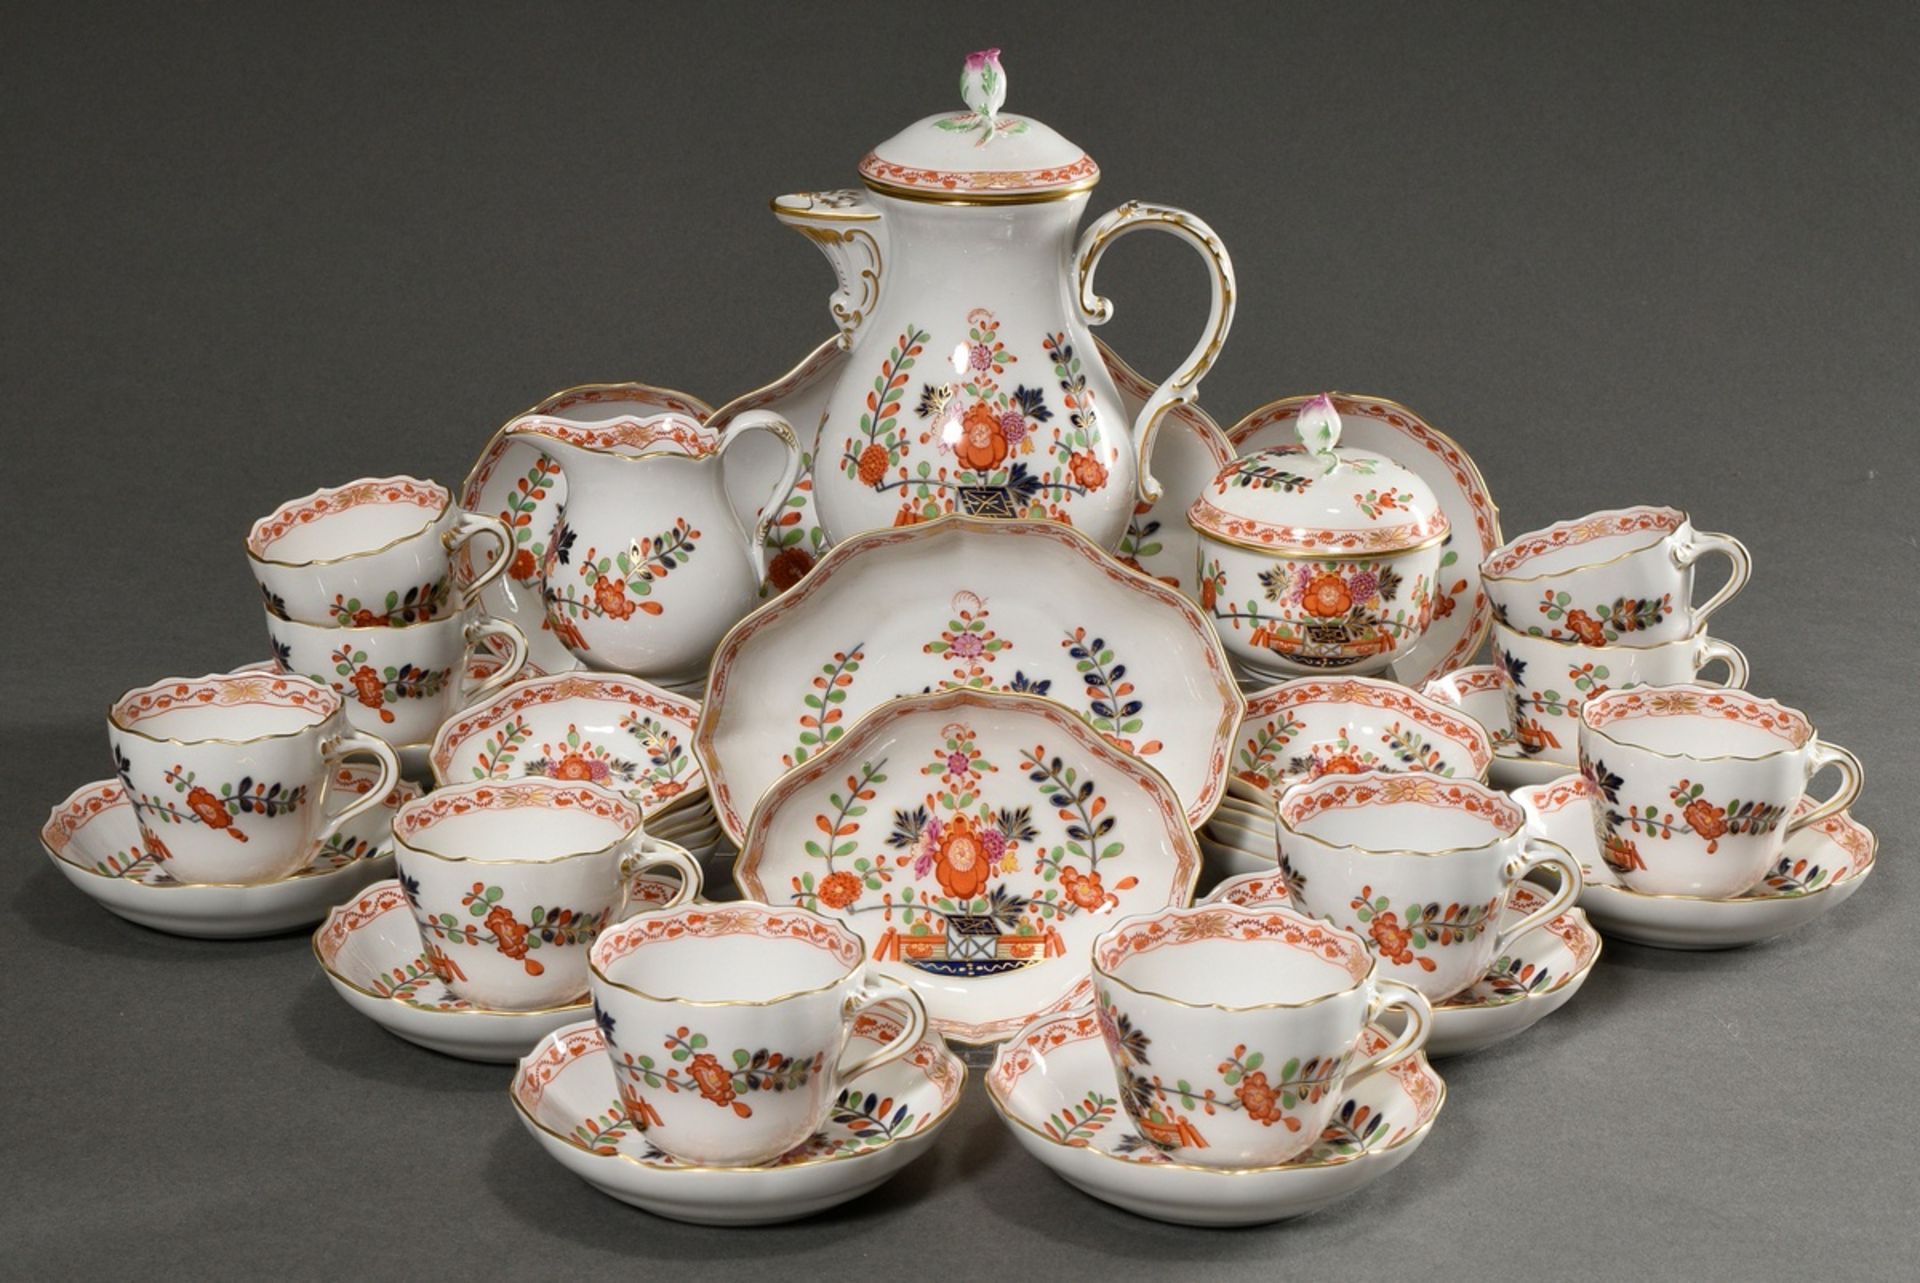 26 Pieces Meissen mocha service "Tischchenmuster" with gold staffage for 10 people, 20th c., consis - Image 2 of 6